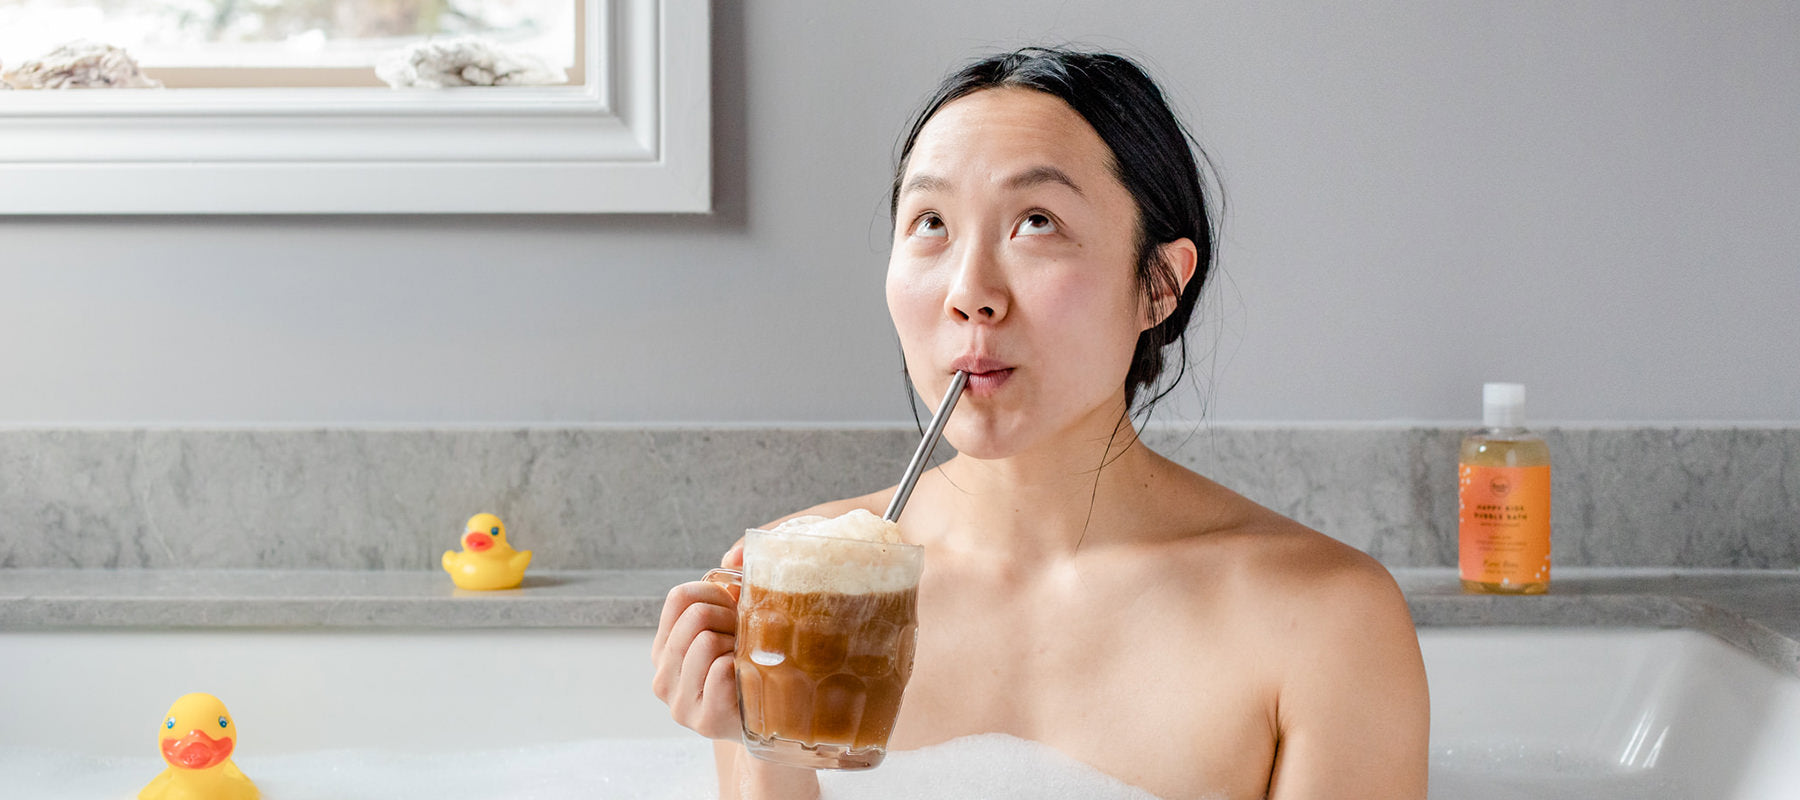 Woman in the bath drinking a root beer float with a bottle of all natural sls-free root beer scented bubble bath and rubber duckies in the background. 